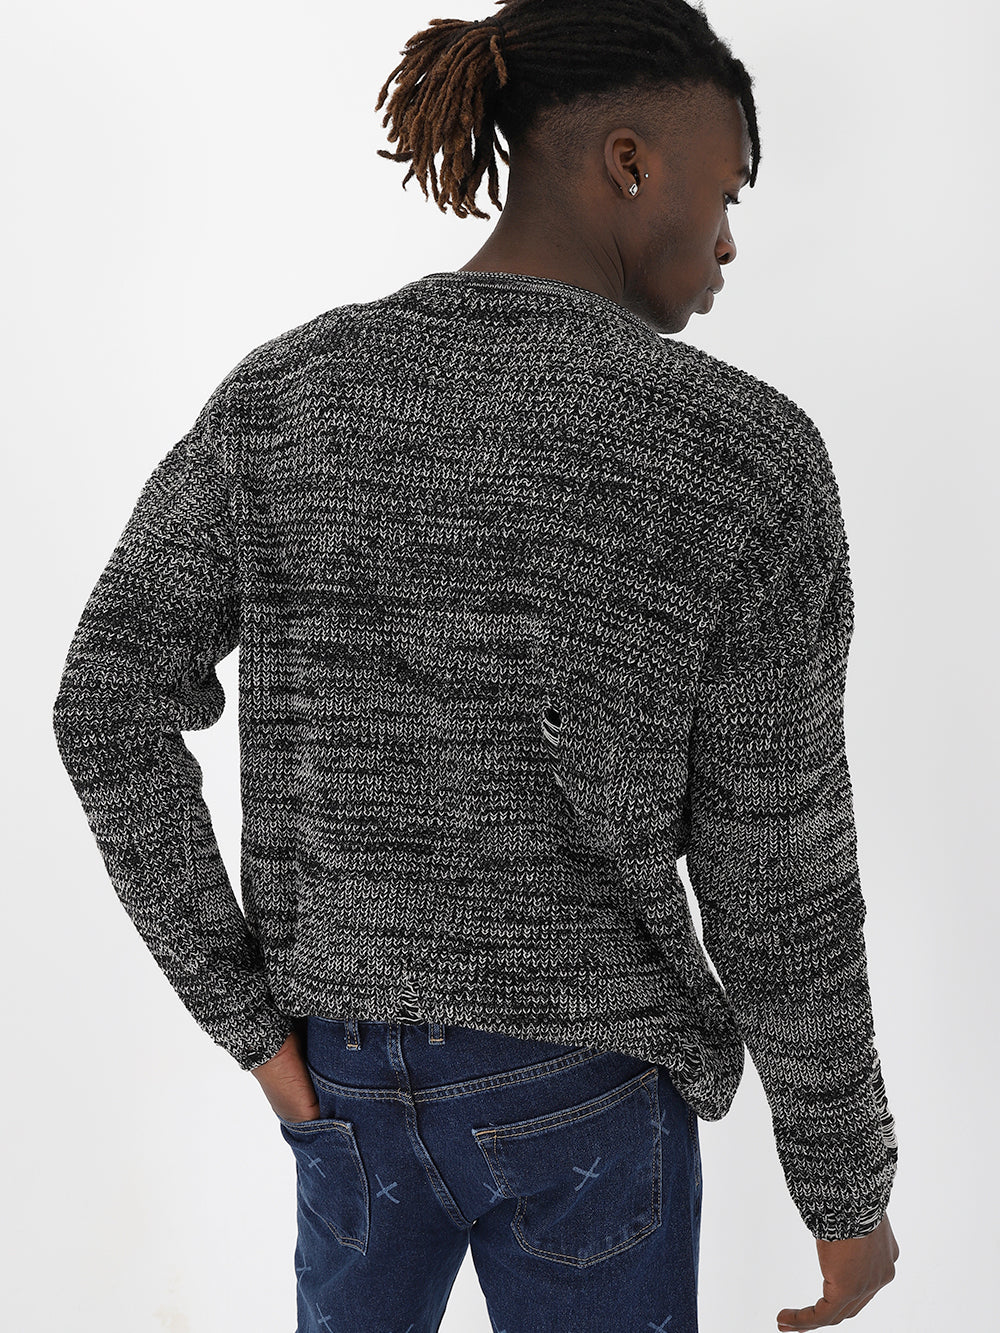 A man wearing a DISTRESSED GENTLEMAN SWEATER | GRAY and jeans with a true-to-size fit.